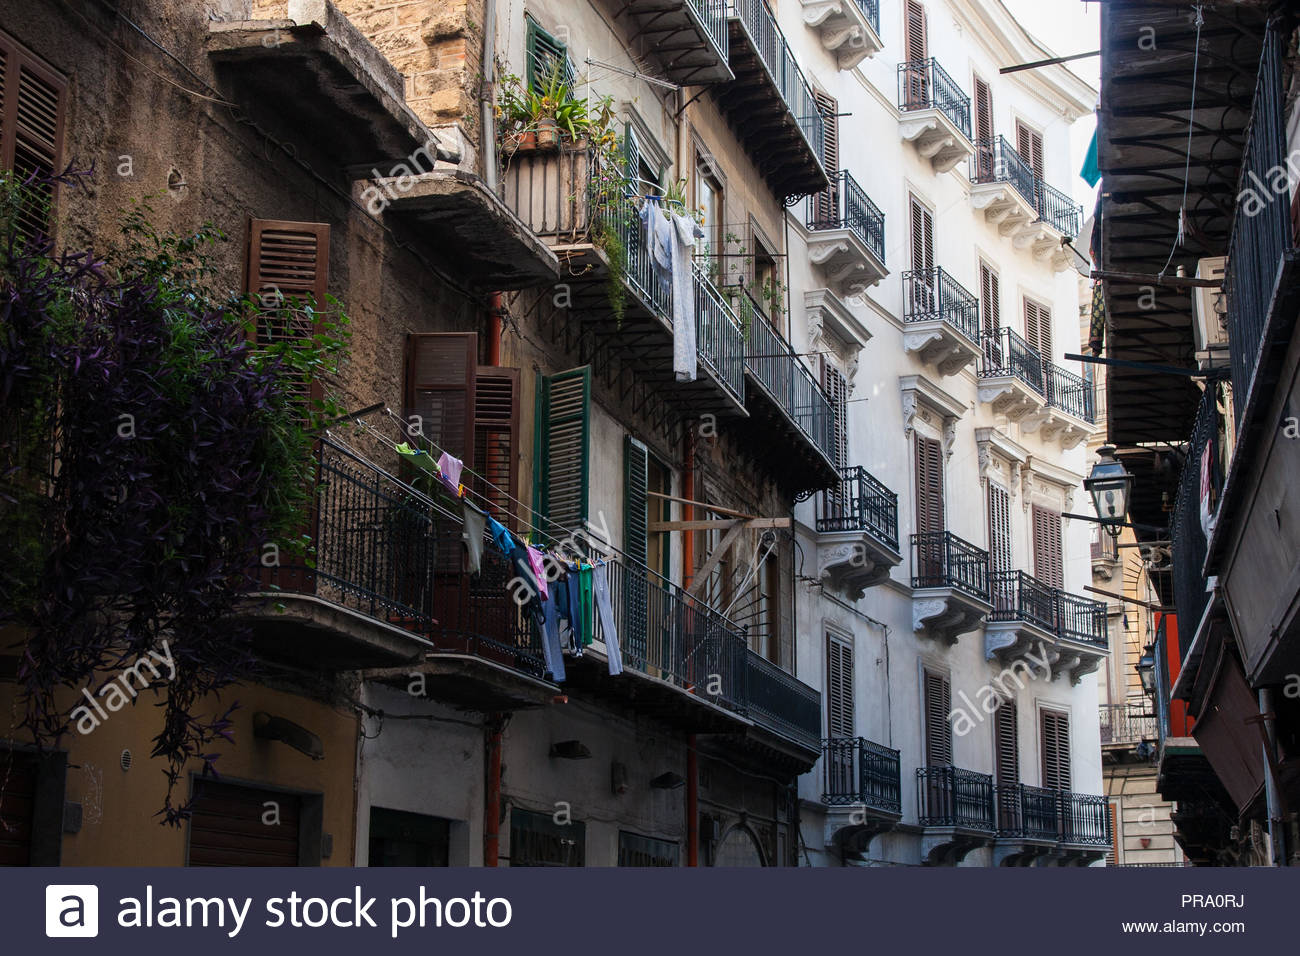 Wallpaper Background Of Palermo Old Residential Building Street